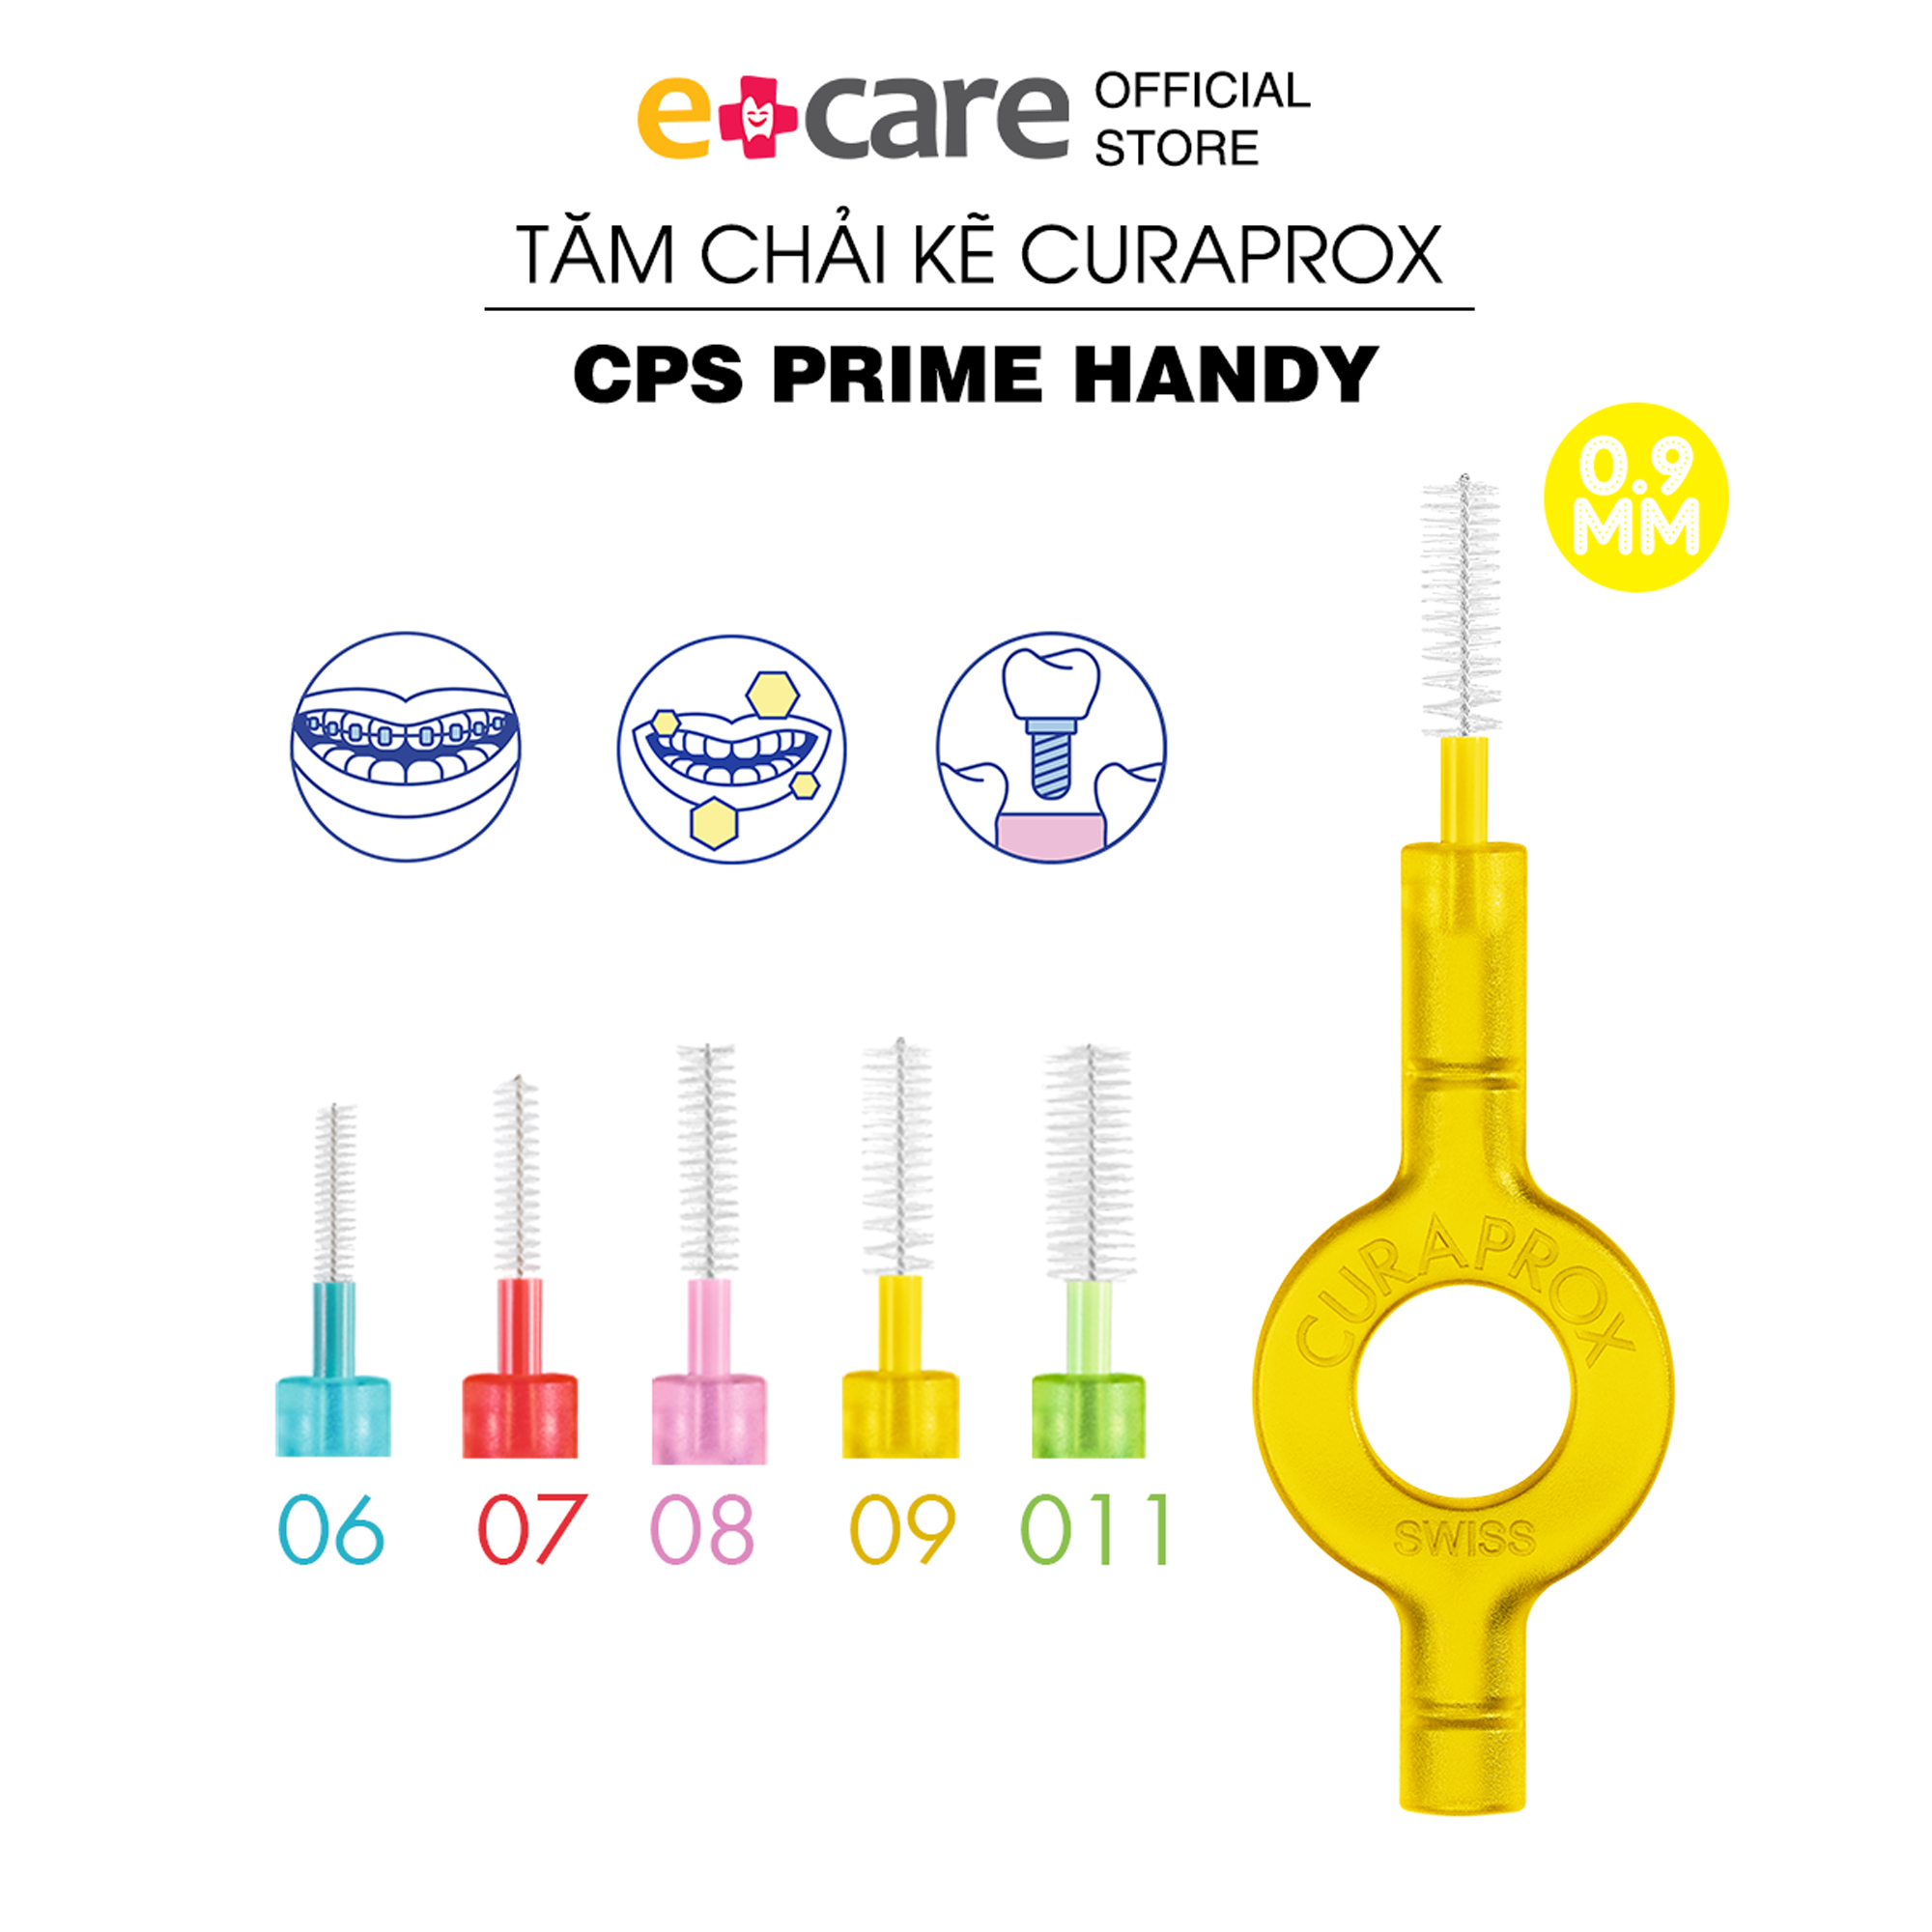 Pack 5 interdental brushes Curaprox CPS Prime Handy size 0.9mm